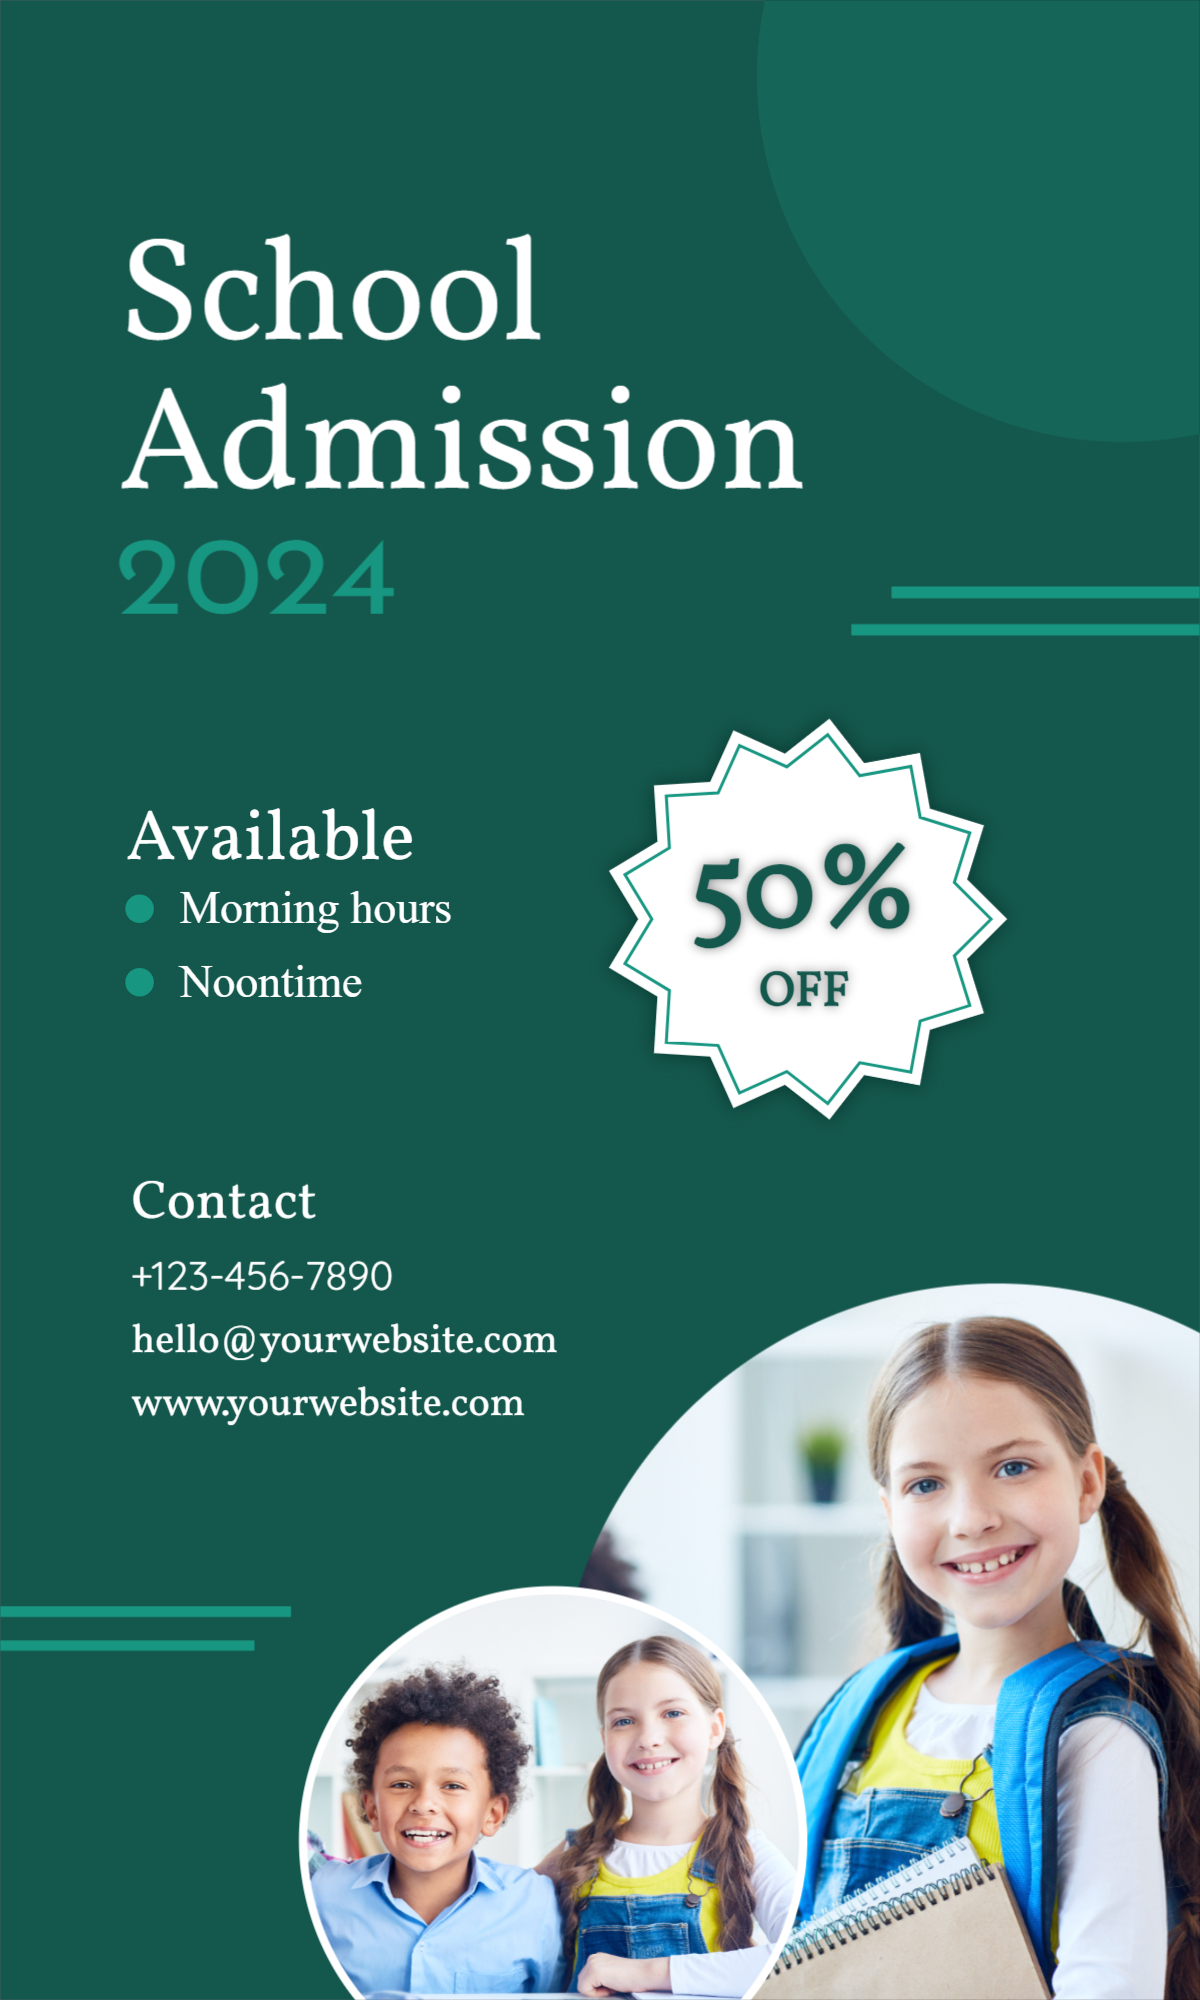 School Admission poster design download for free